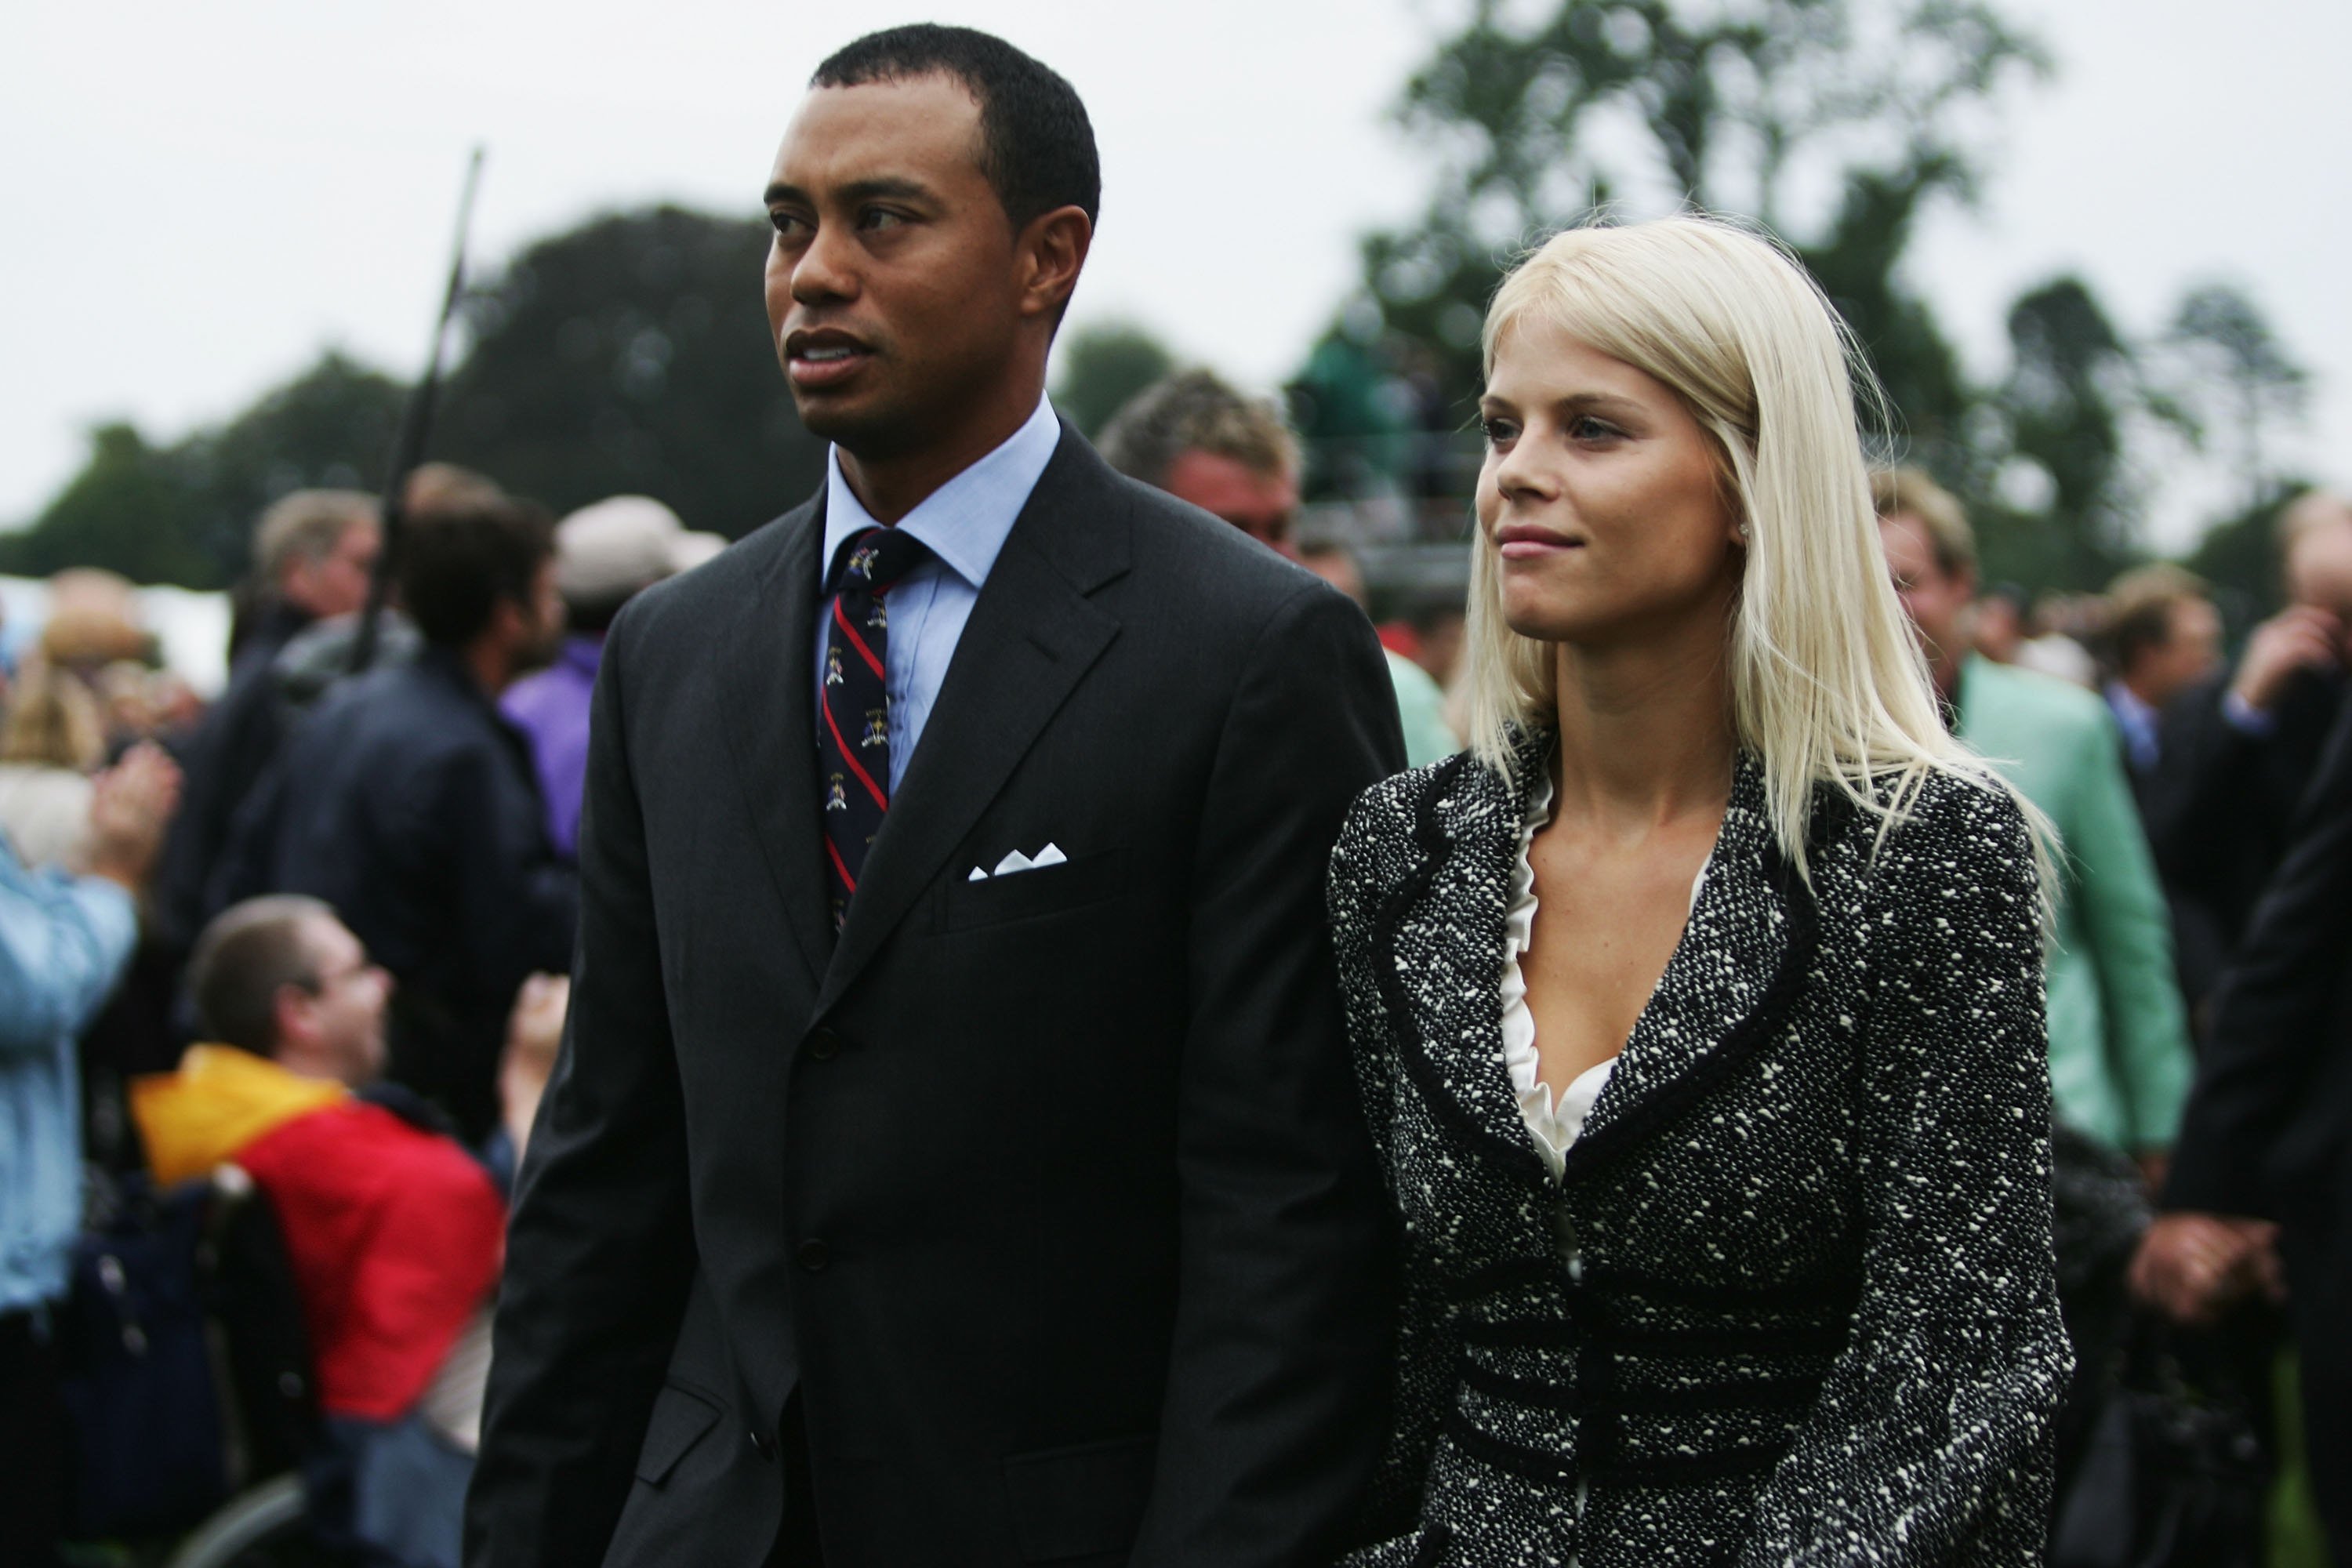 Tiger Woods and Elin Nordegren on during the Opening Ceremony of the 2006 Ryder Cup at The K Club on September 21, 2006 in Straffan, Co. Kildare, Ireland. / Source: Getty Images